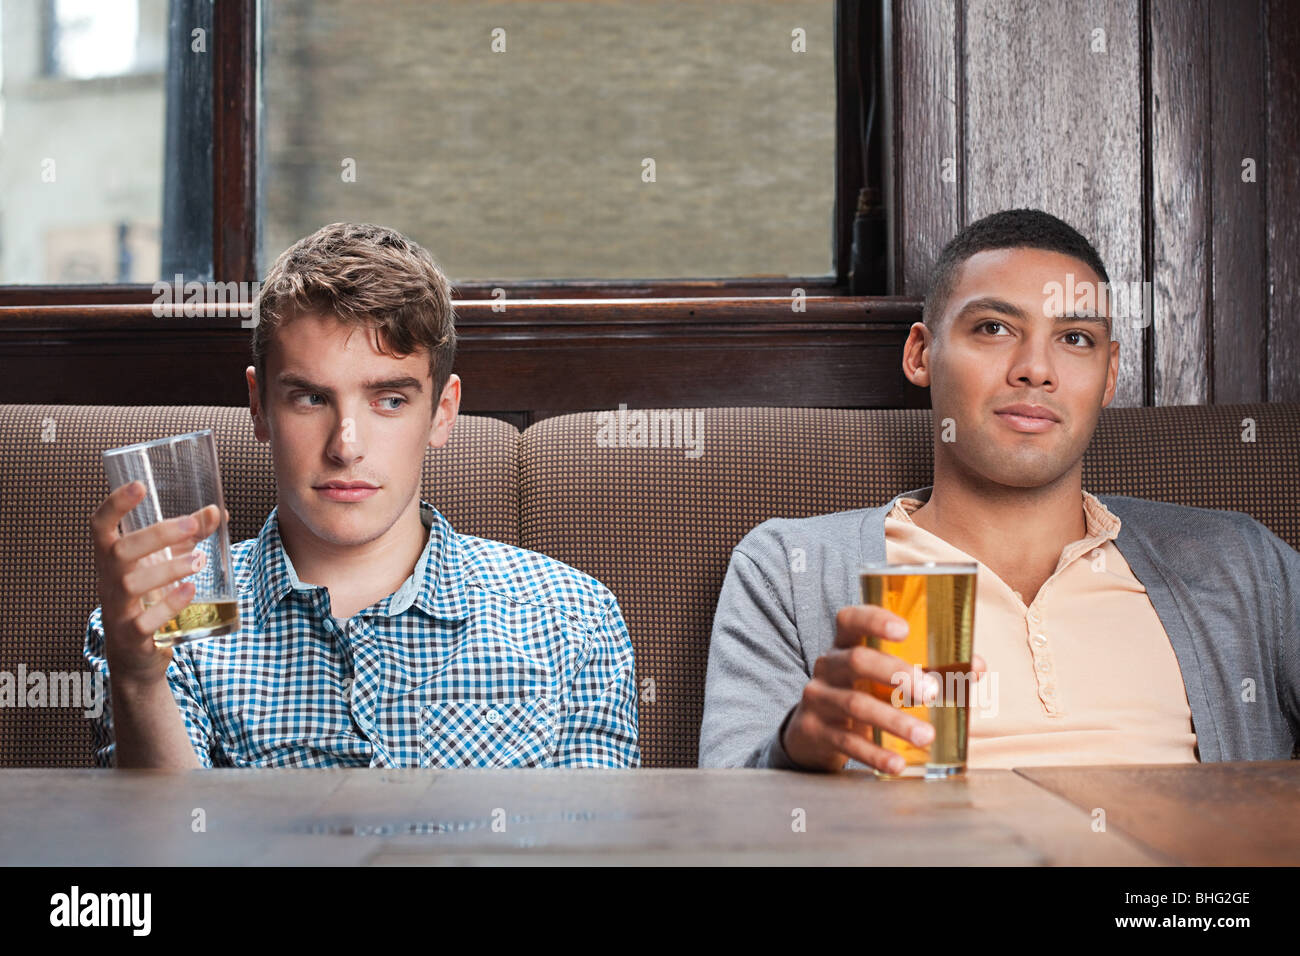 Man in Bar. Two young men